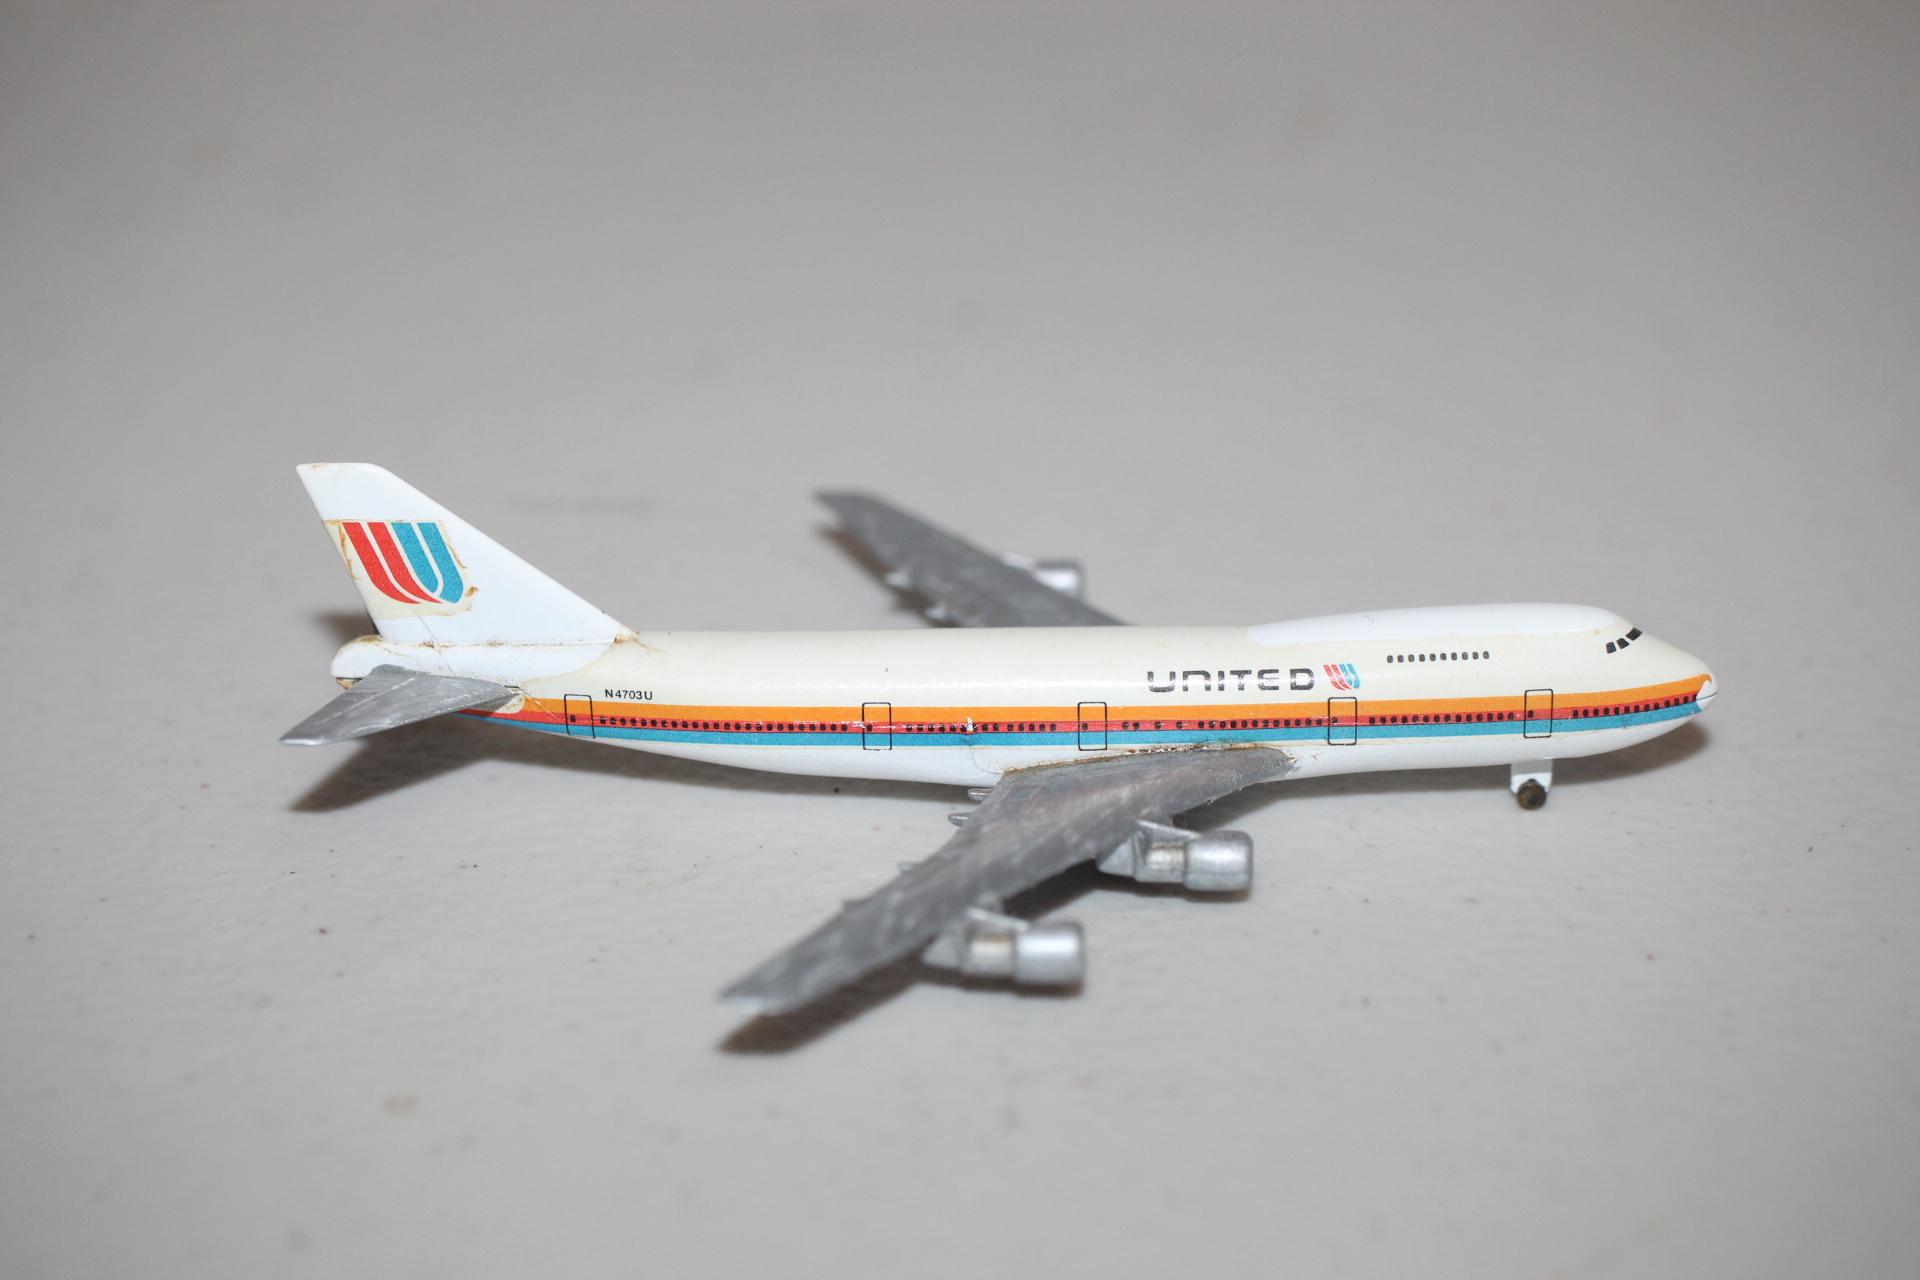 United Boeing 747 Die Cast, 1:600 Scale, 901/23, Schabak, Made In Germany